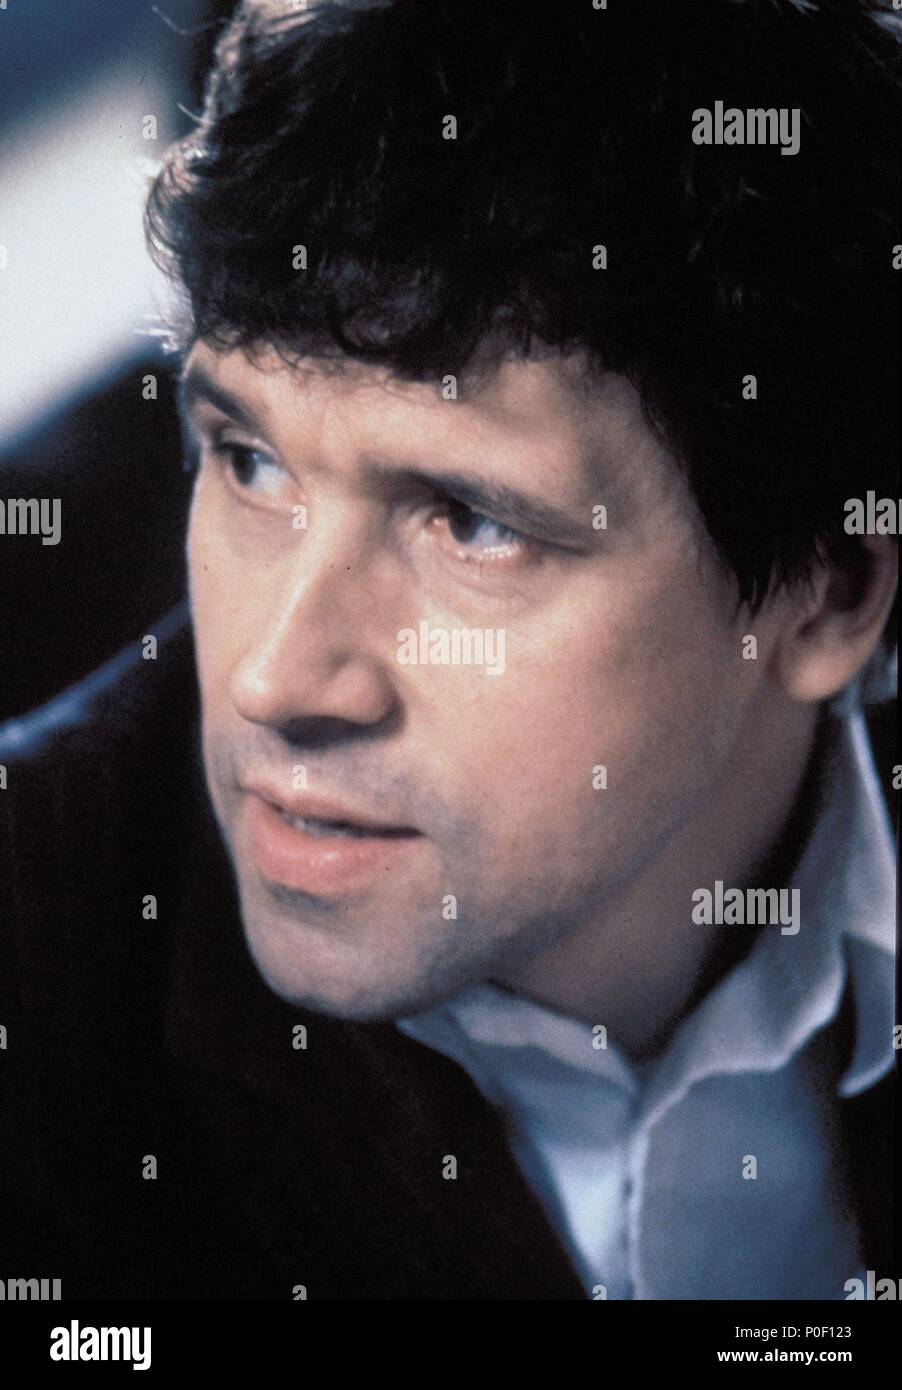 Original Film Title: THE CRYING GAME.  English Title: THE CRYING GAME.  Film Director: NEIL JORDAN.  Year: 1992.  Stars: STEPHEN REA. Credit: PALACE PICTURES / Album Stock Photo